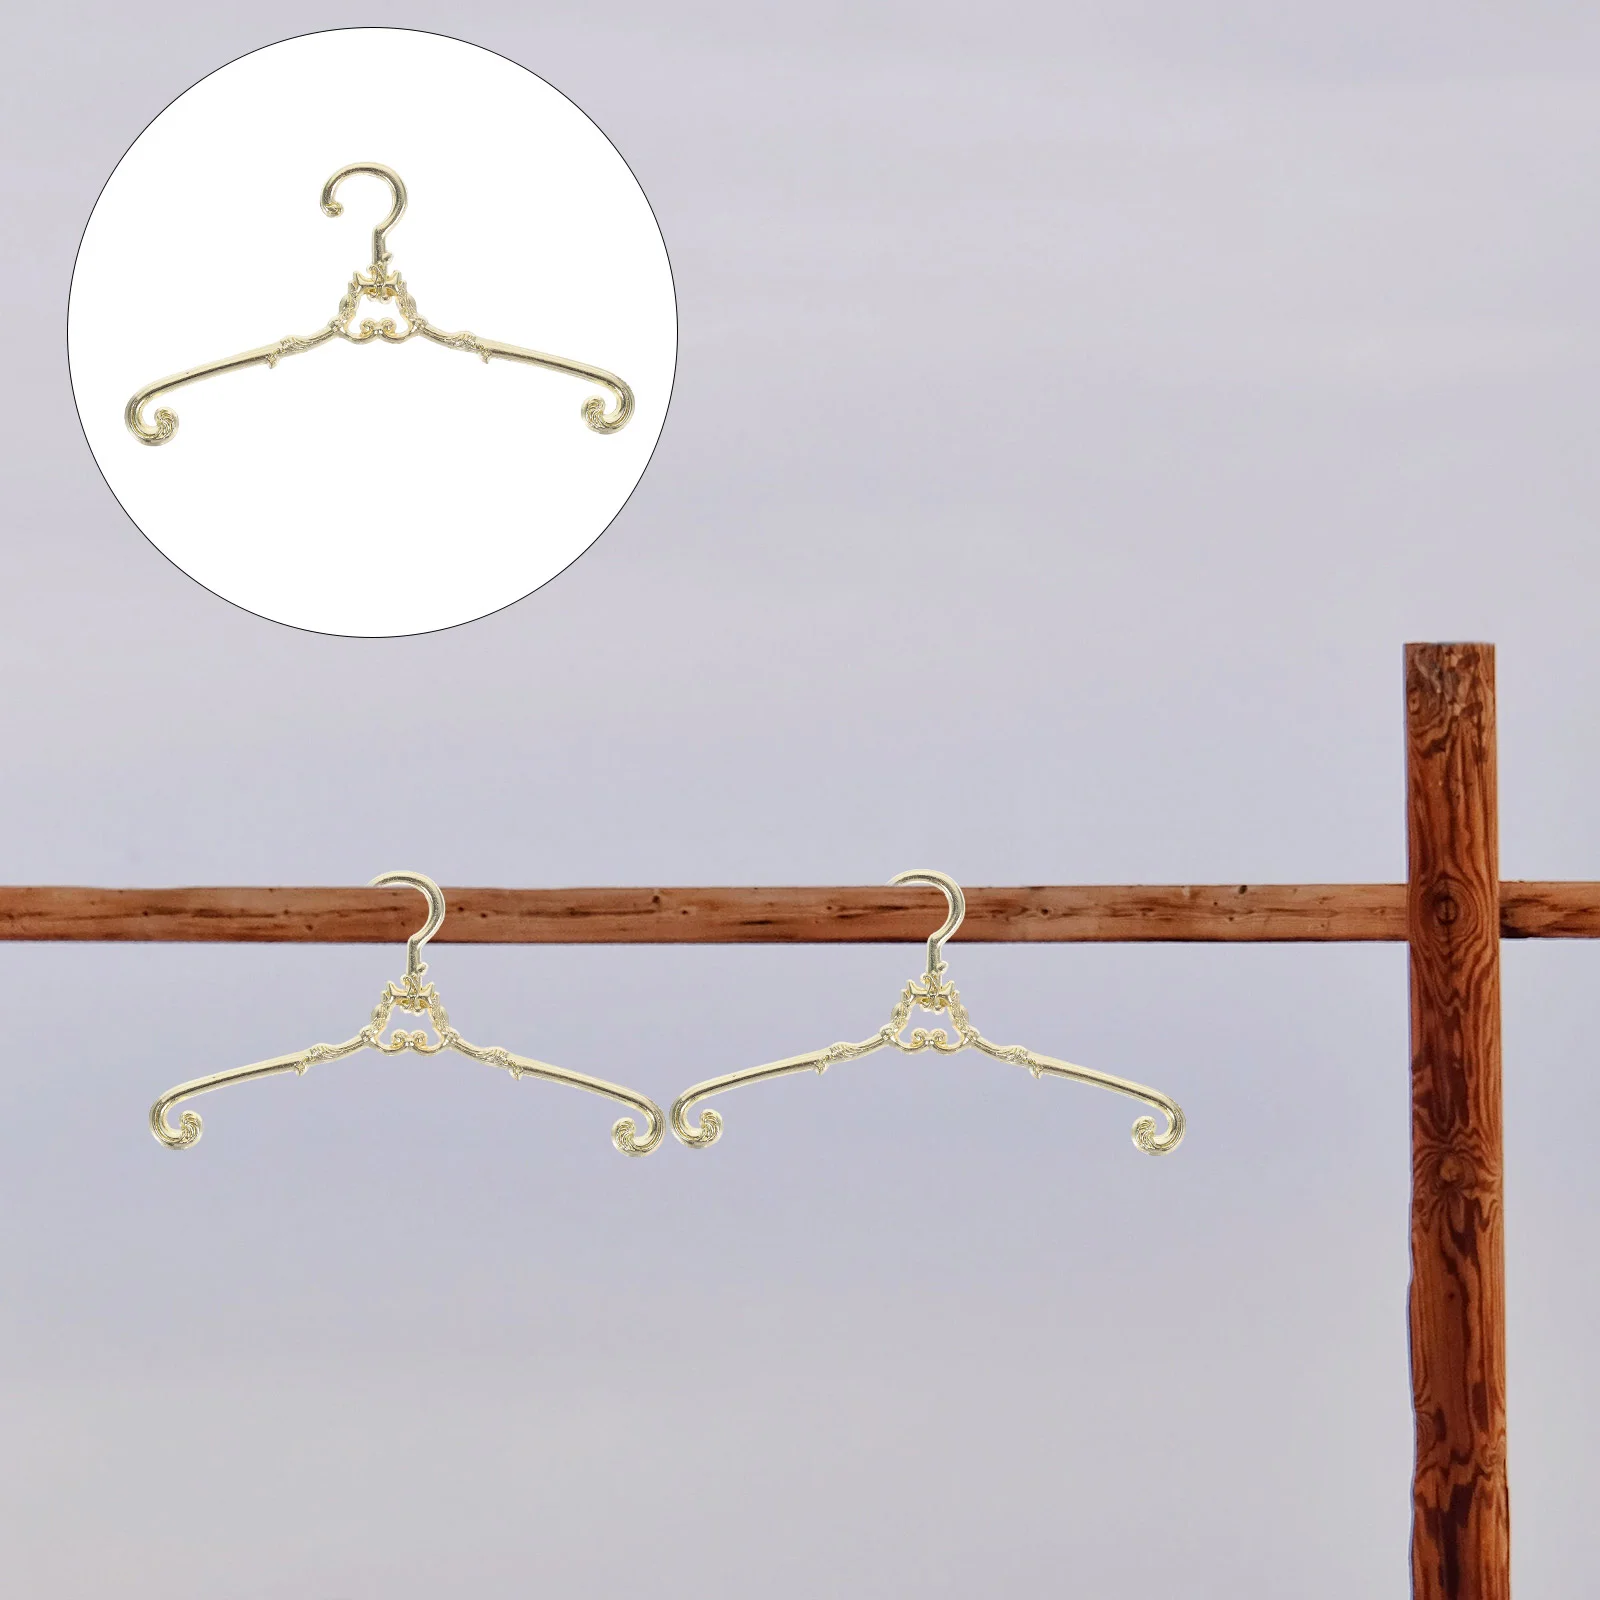 10 Pcs Hangers Metal Clothes Mini House Delicate Coat for Dolls Dress Closet mini hanger house hangers clothes simulated ornaments outfit delicate hanging tiny exquisite rack